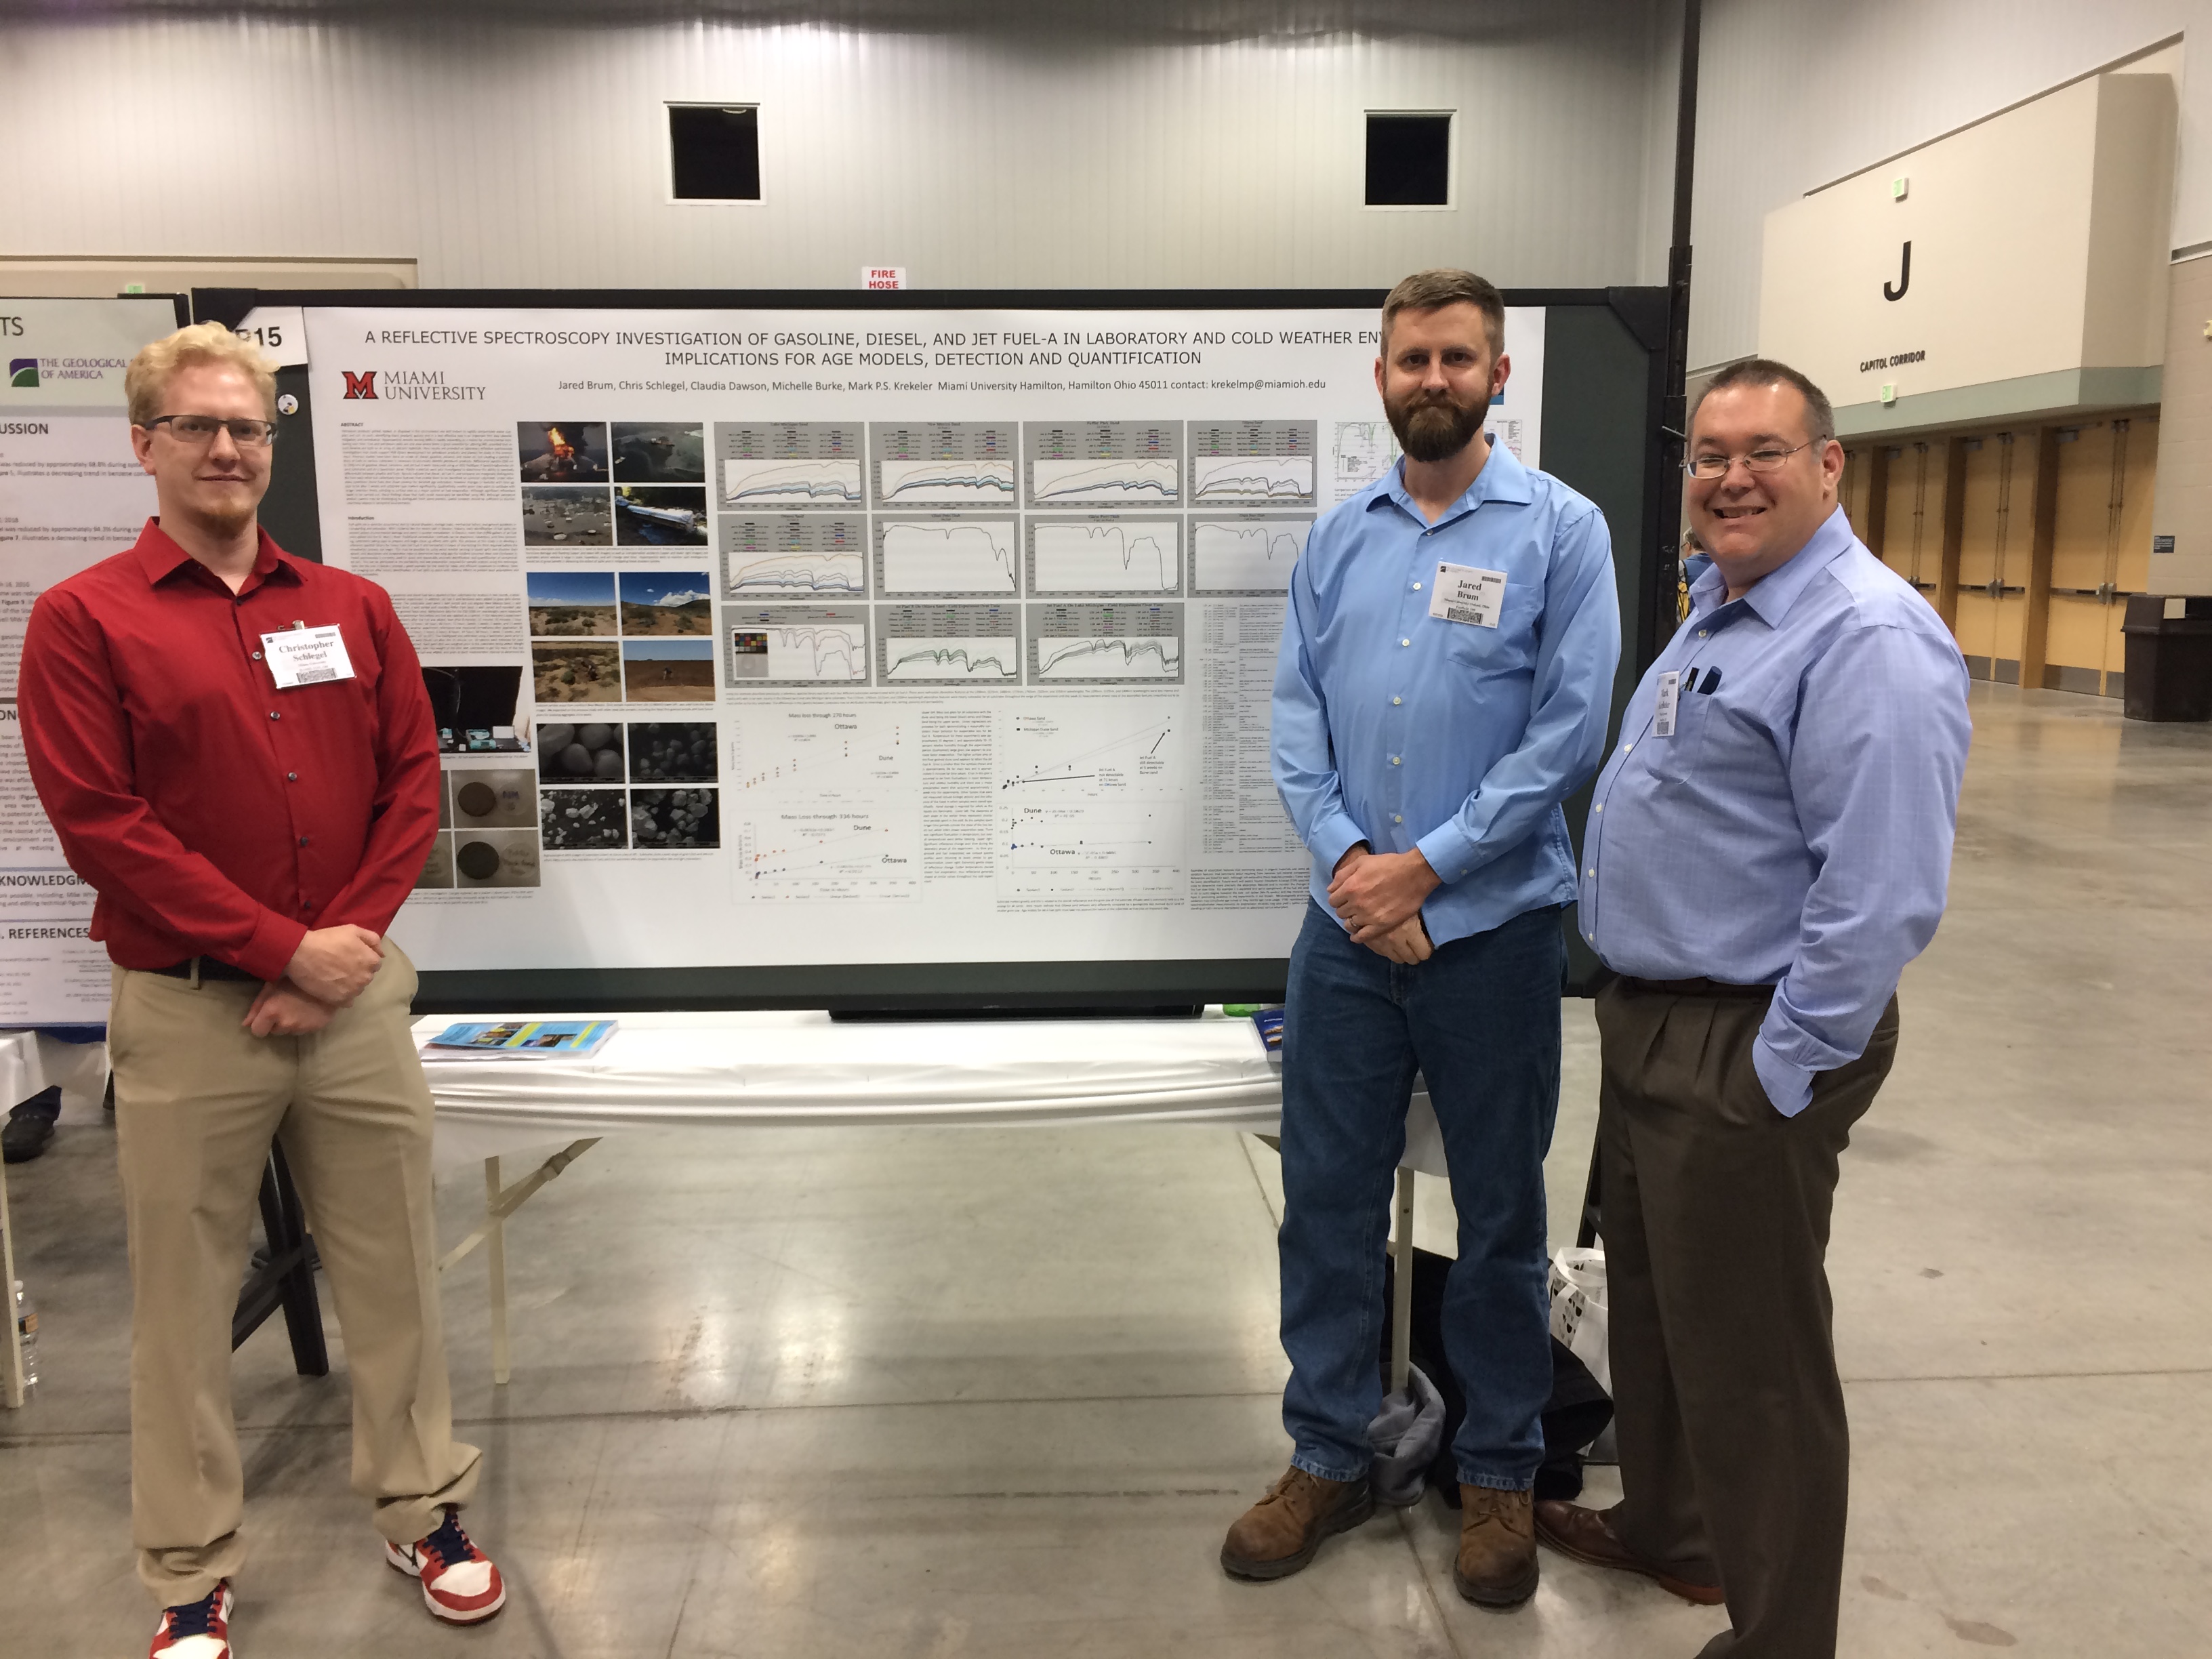 Chris Schlegel (left) and Jared Brum (right) presented a poster focused on remote sensing of environmental spills of jet fuel and diesel fuel.